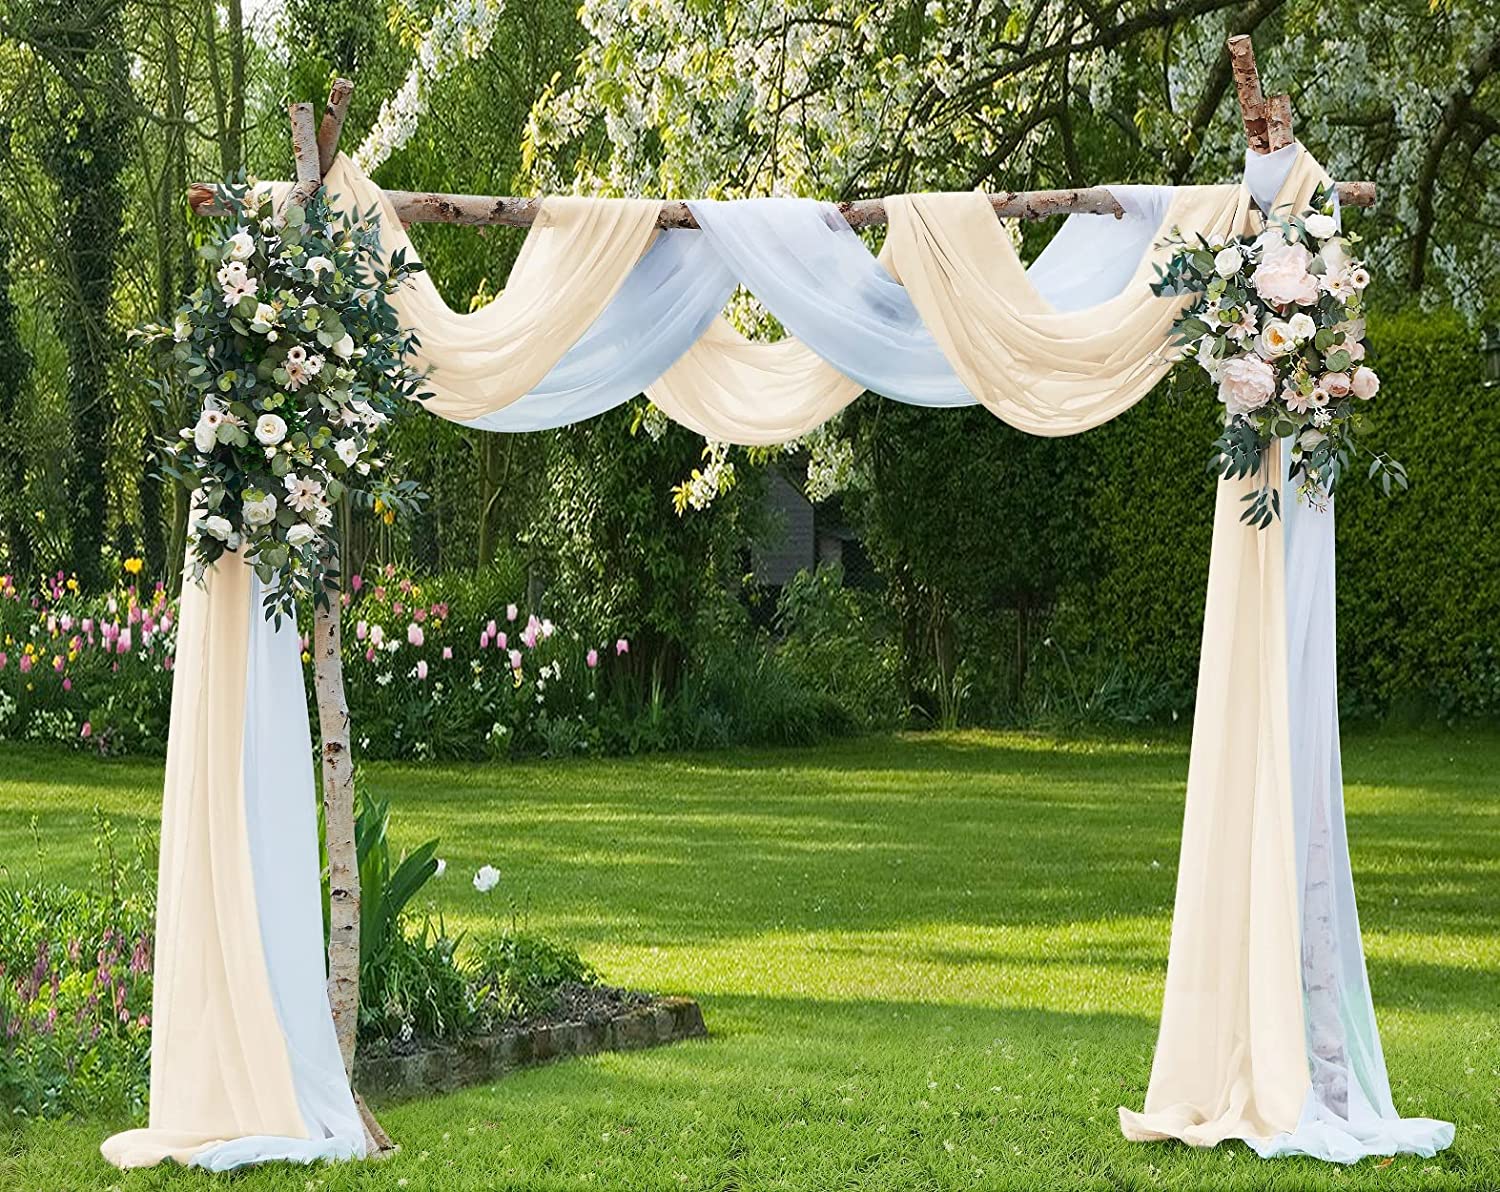 Warm Home Designs Wedding Arch Draping Fabric For Decoration ...